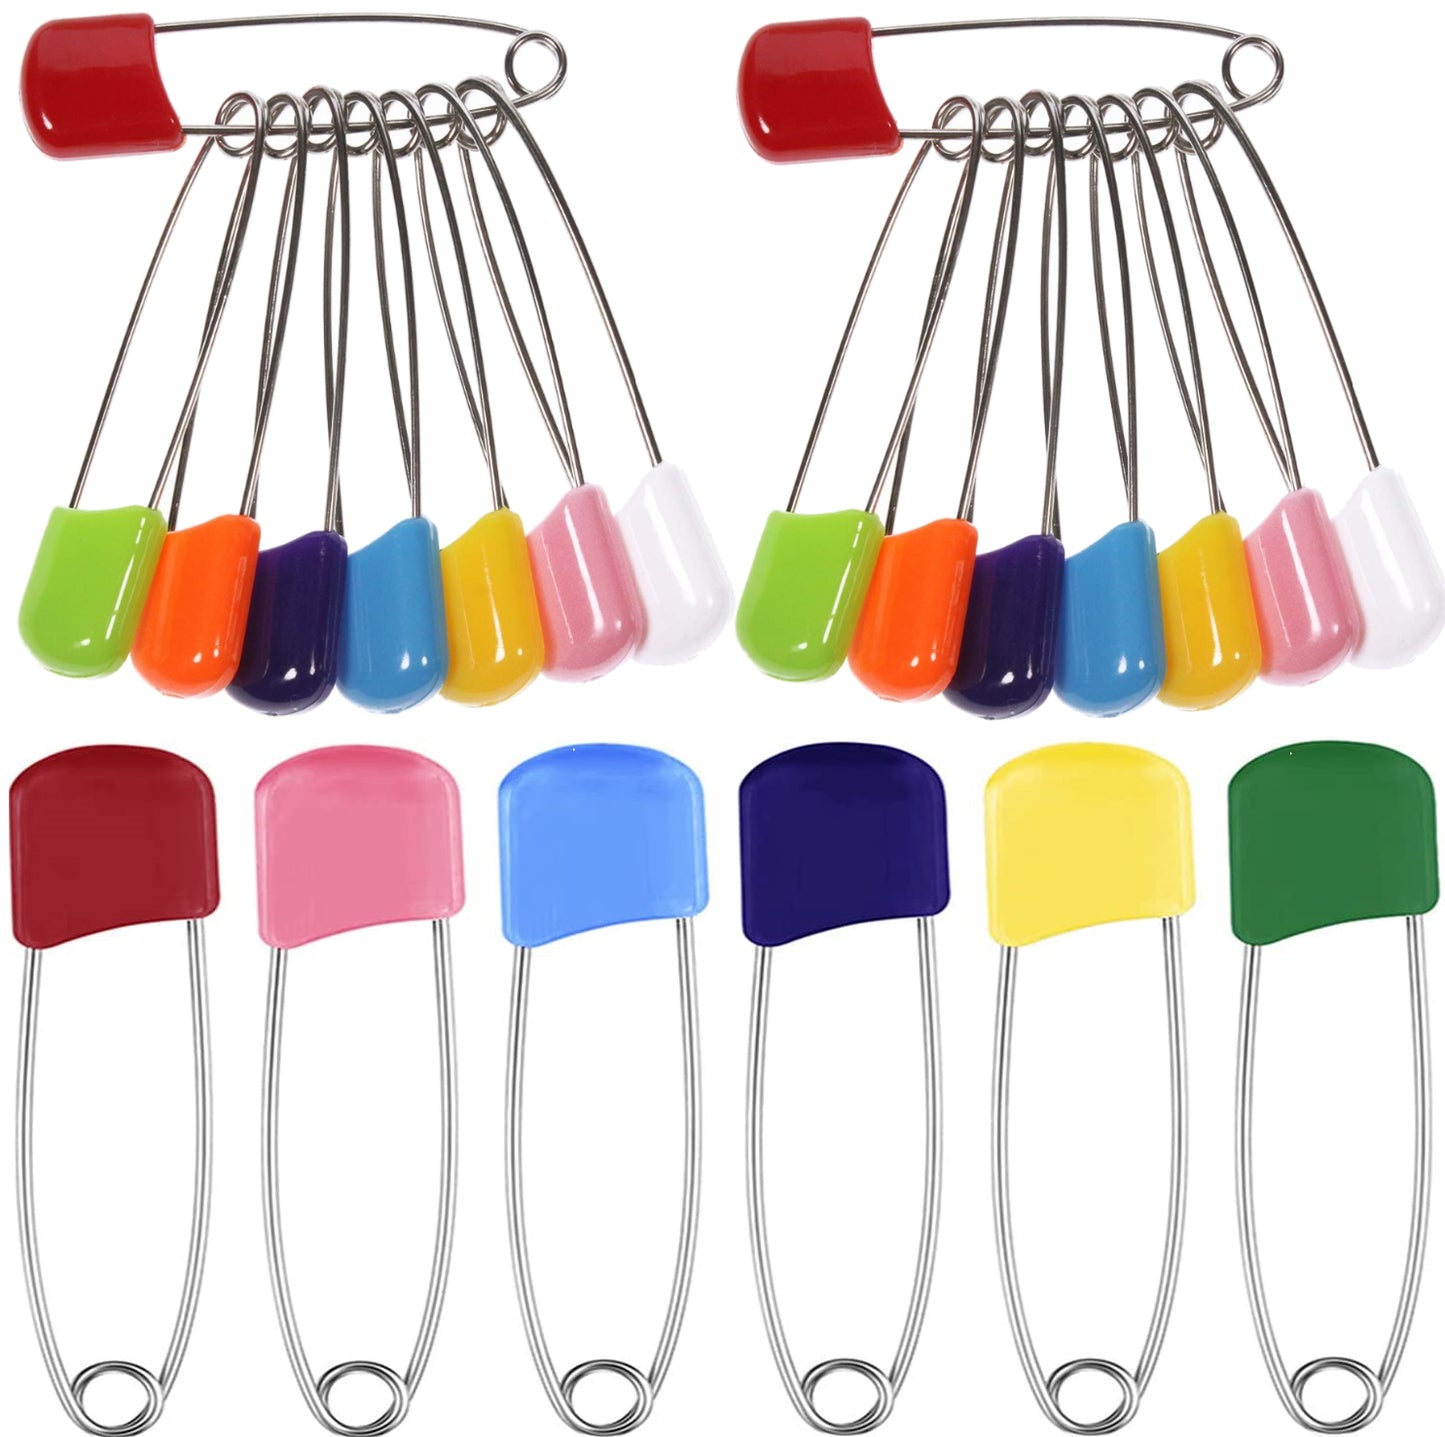 Plastic Head Safety Pins NiftyPlaza 2 Inch Long 50 Pcs Safety pin Locking Baby Cloth Diaper Nappy Pins (Random Colors)